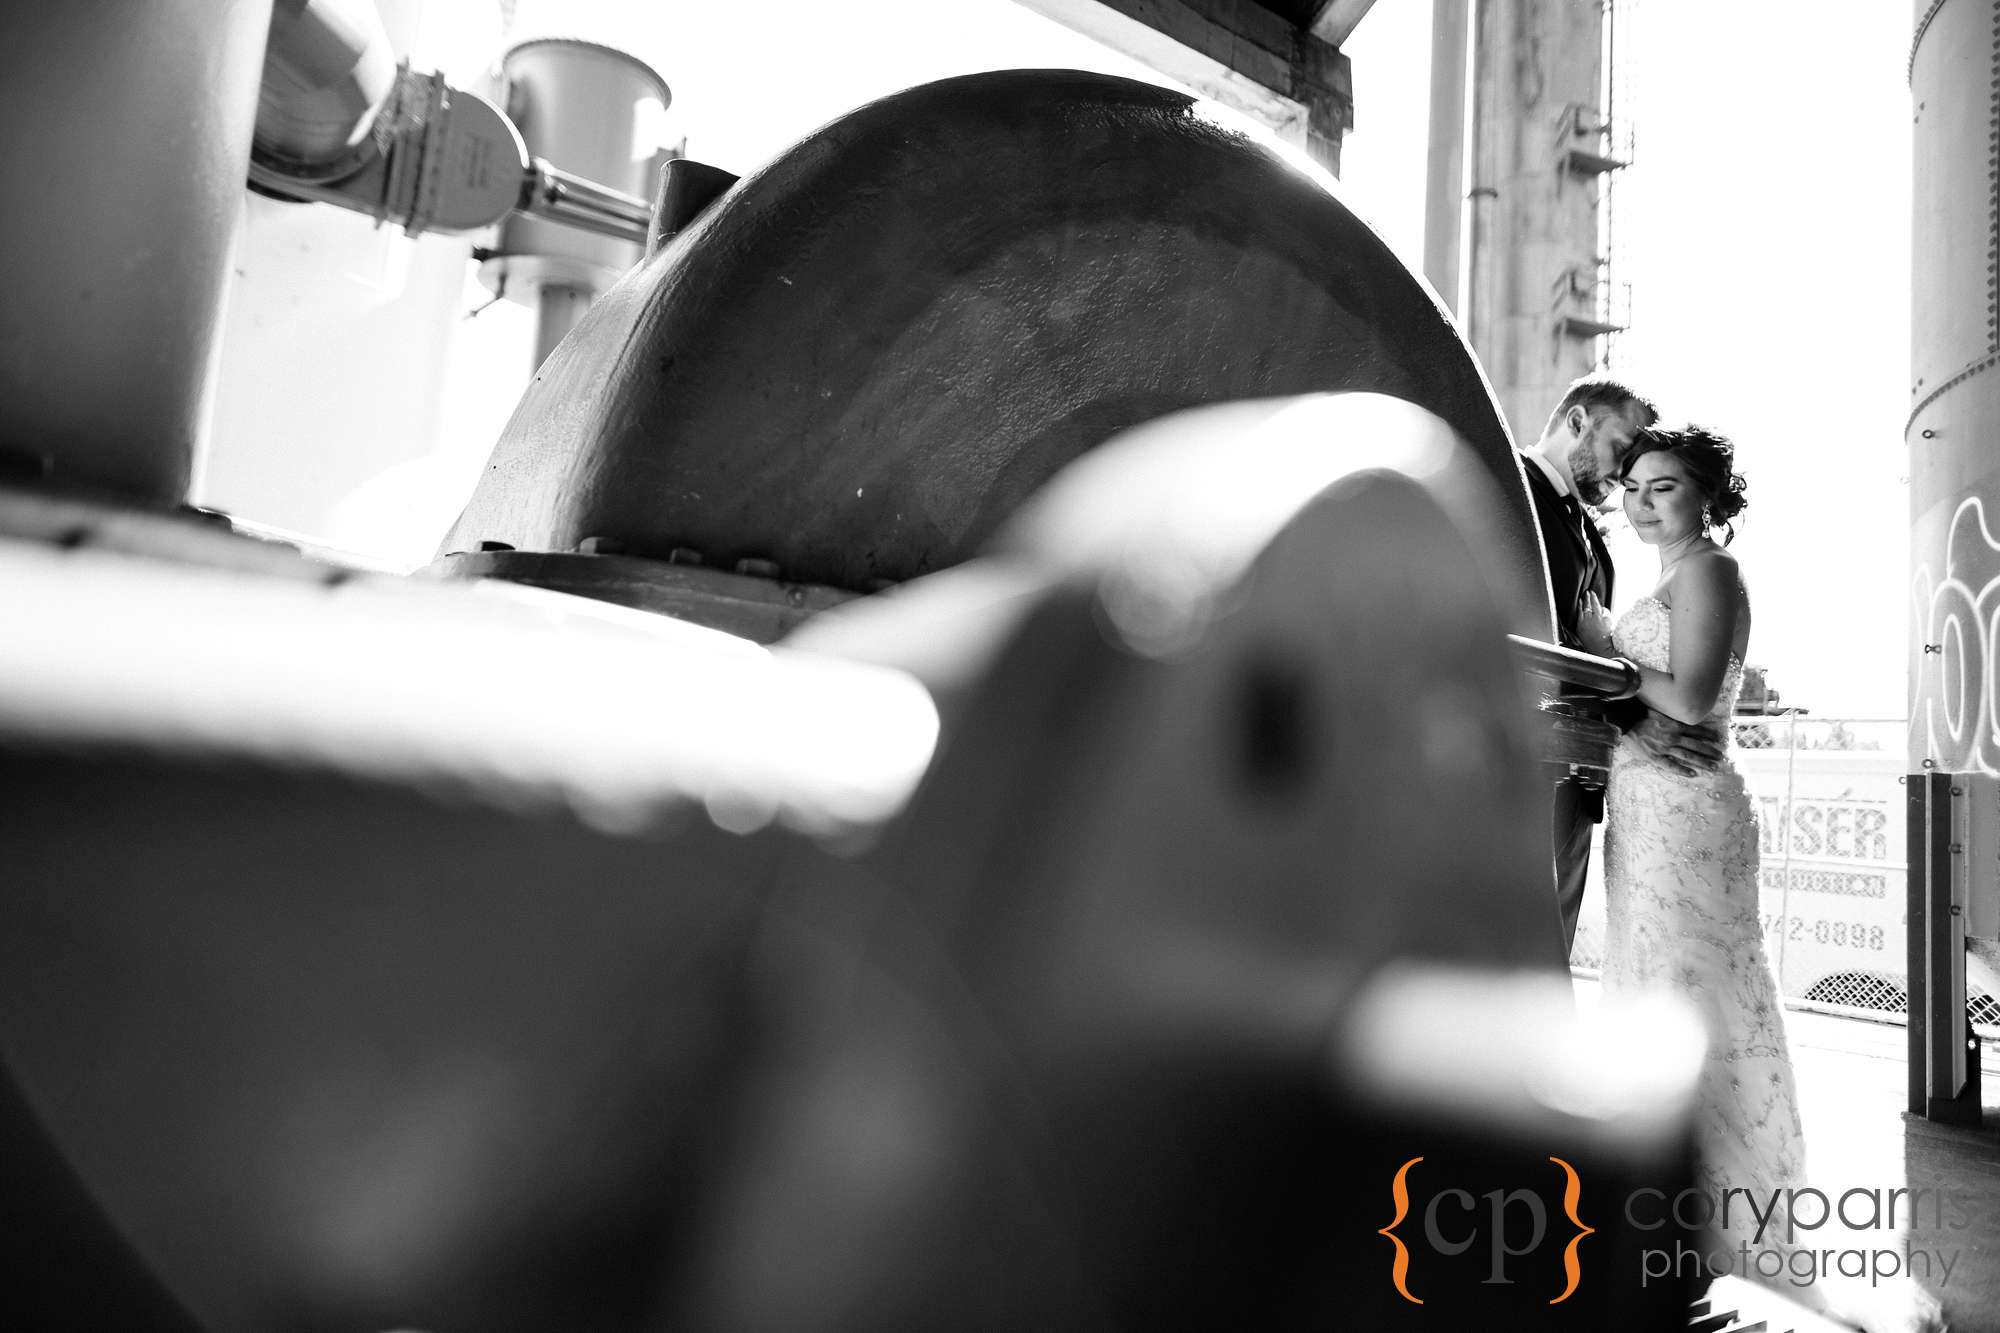 Wedding photography with industrial equipment